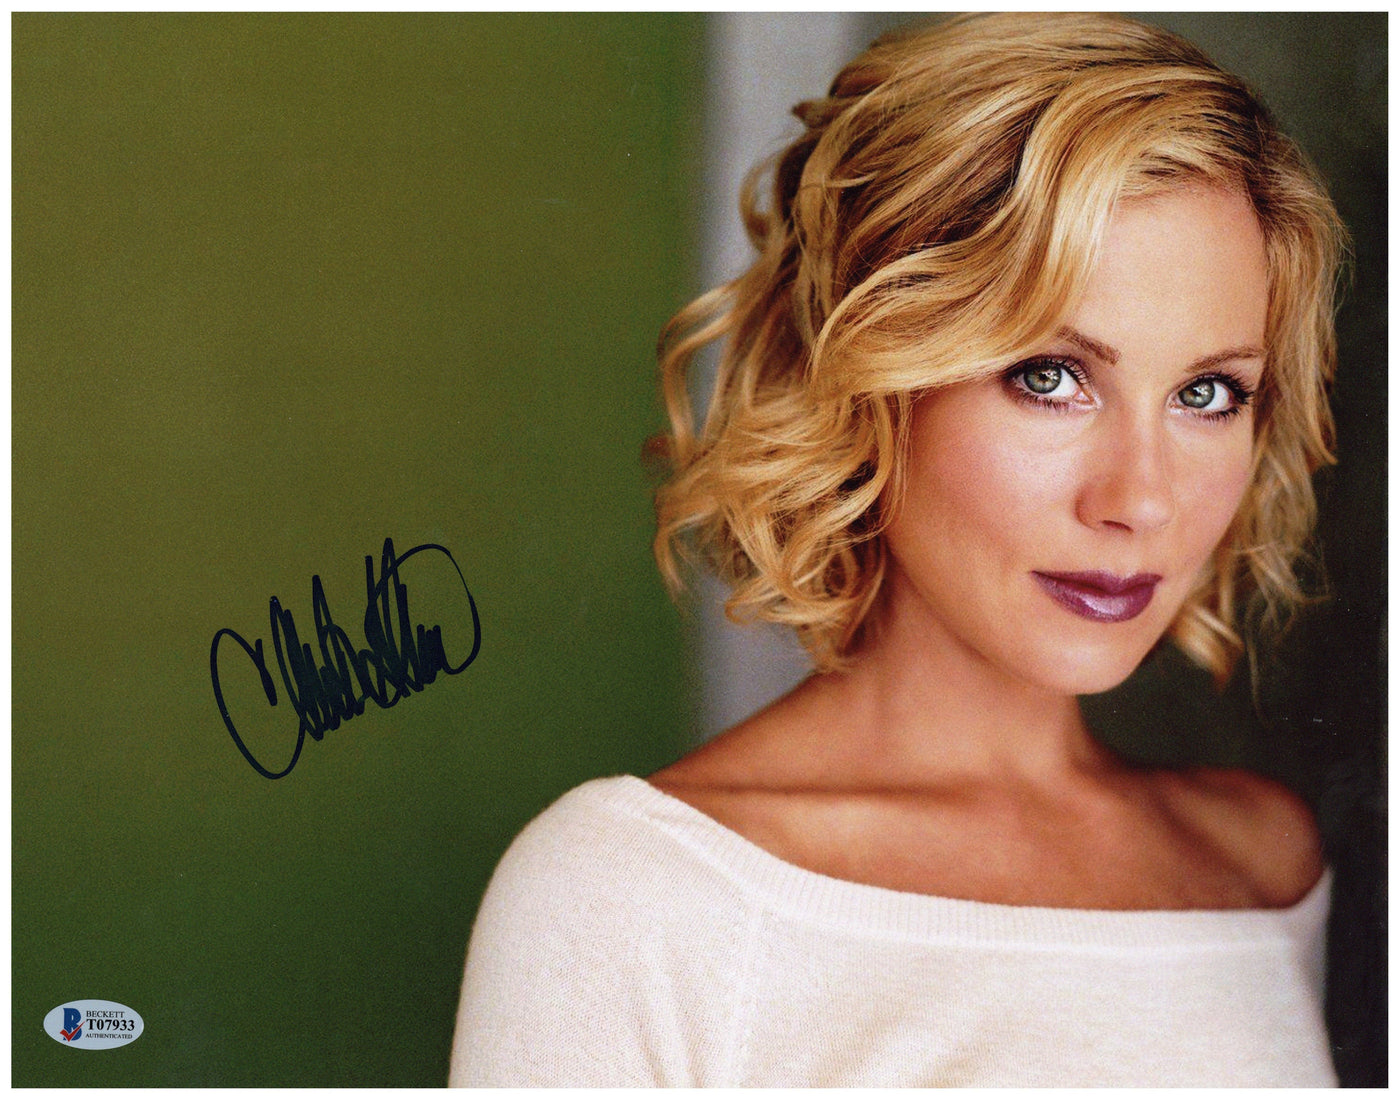 Christina Applegate Autographed 11x14 Photo Married with Children BAS COA